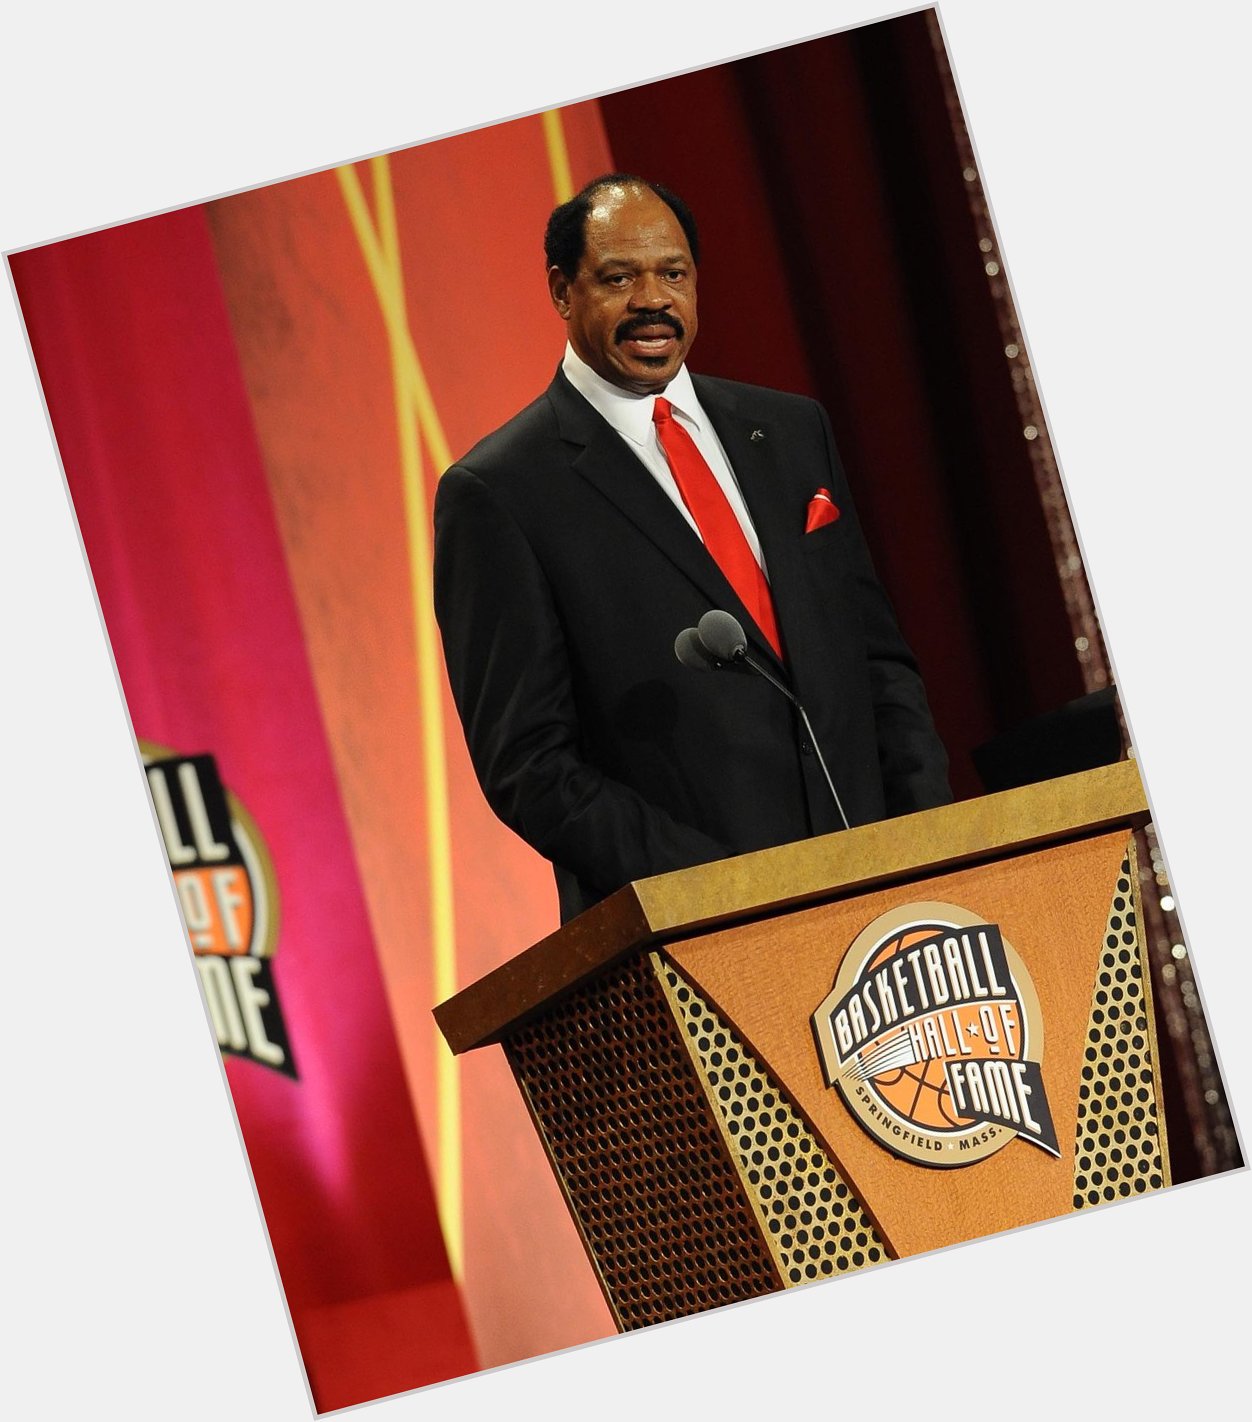 Join us in wishing Artis Gilmore and Sidney Moncrief a Happy Birthday.  